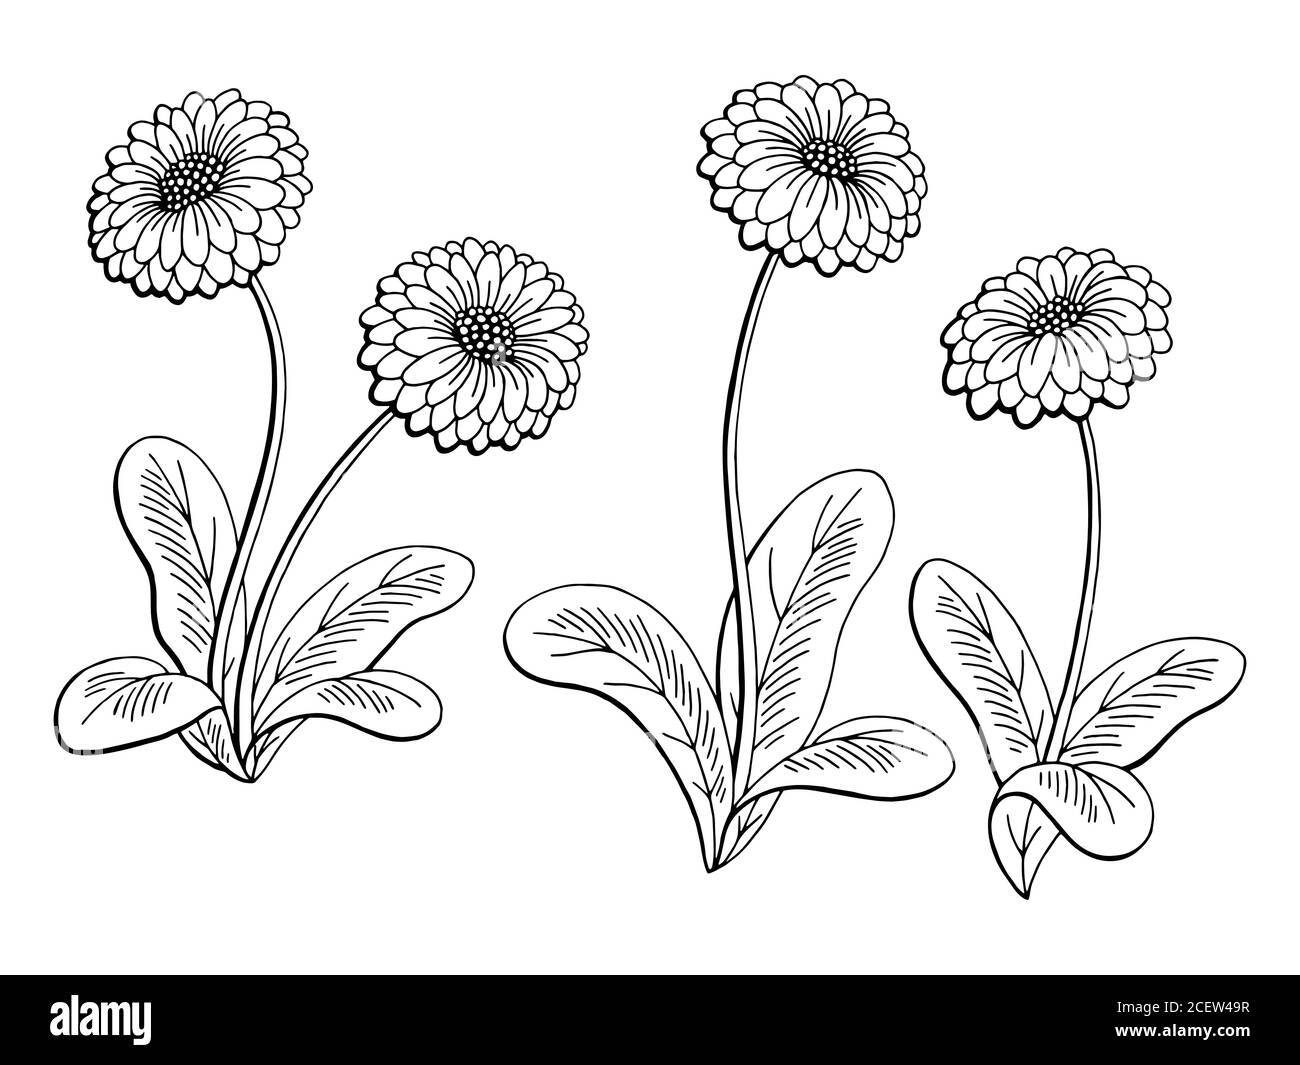 Daisy flower graphic black white isolated sketch illustration vector Stock Vector